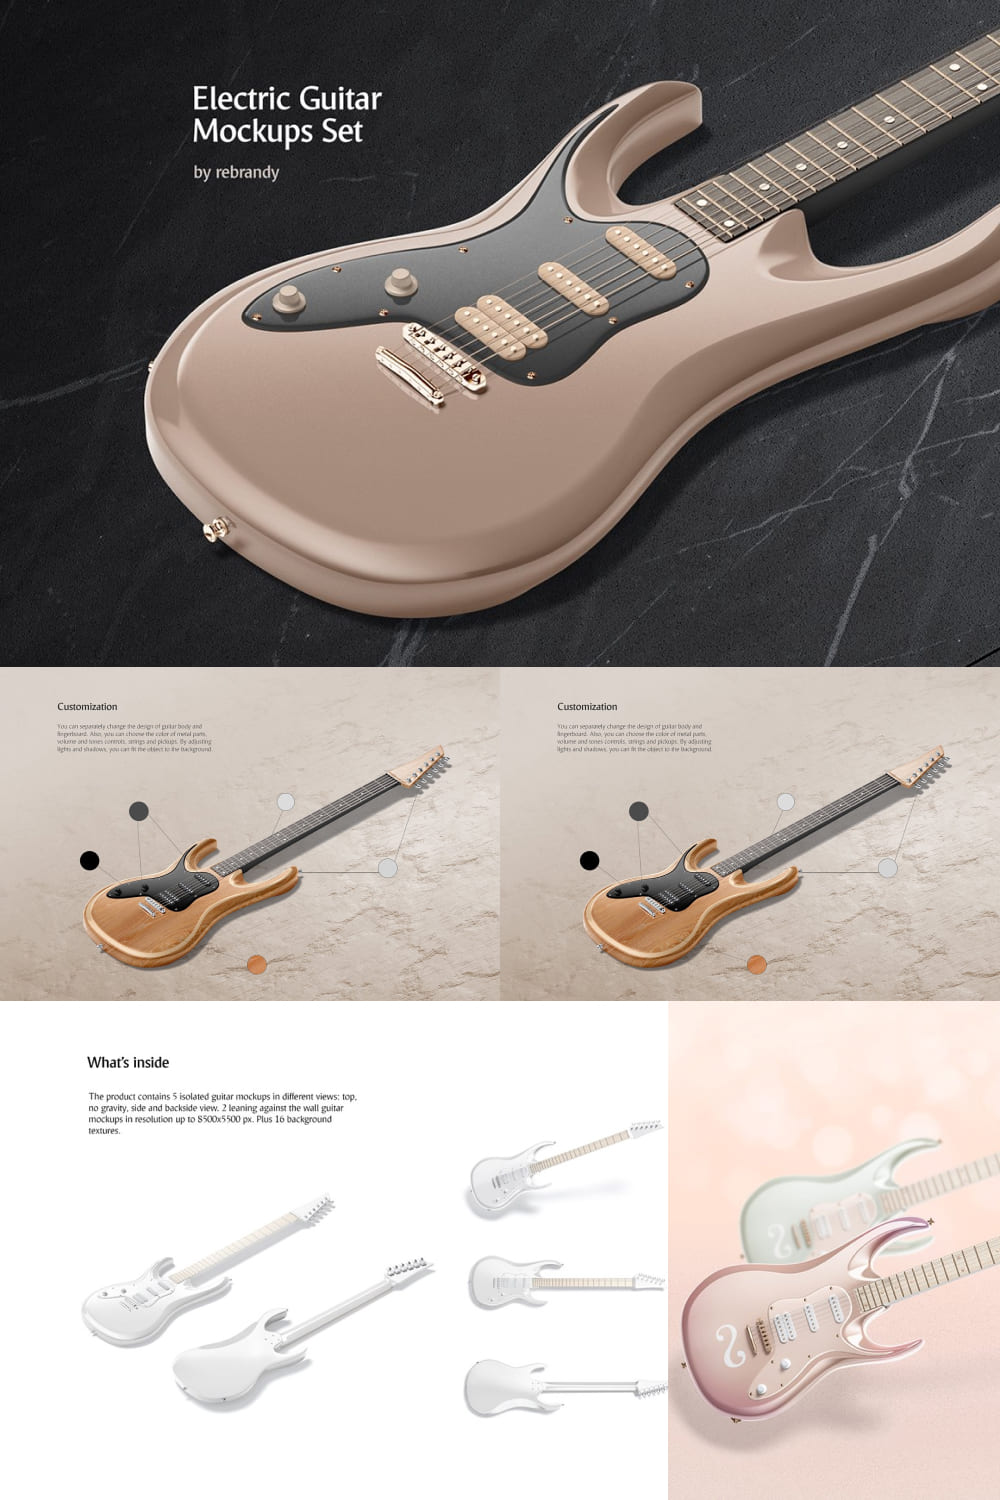 Electric guitars with decorative patterns and without patterns.